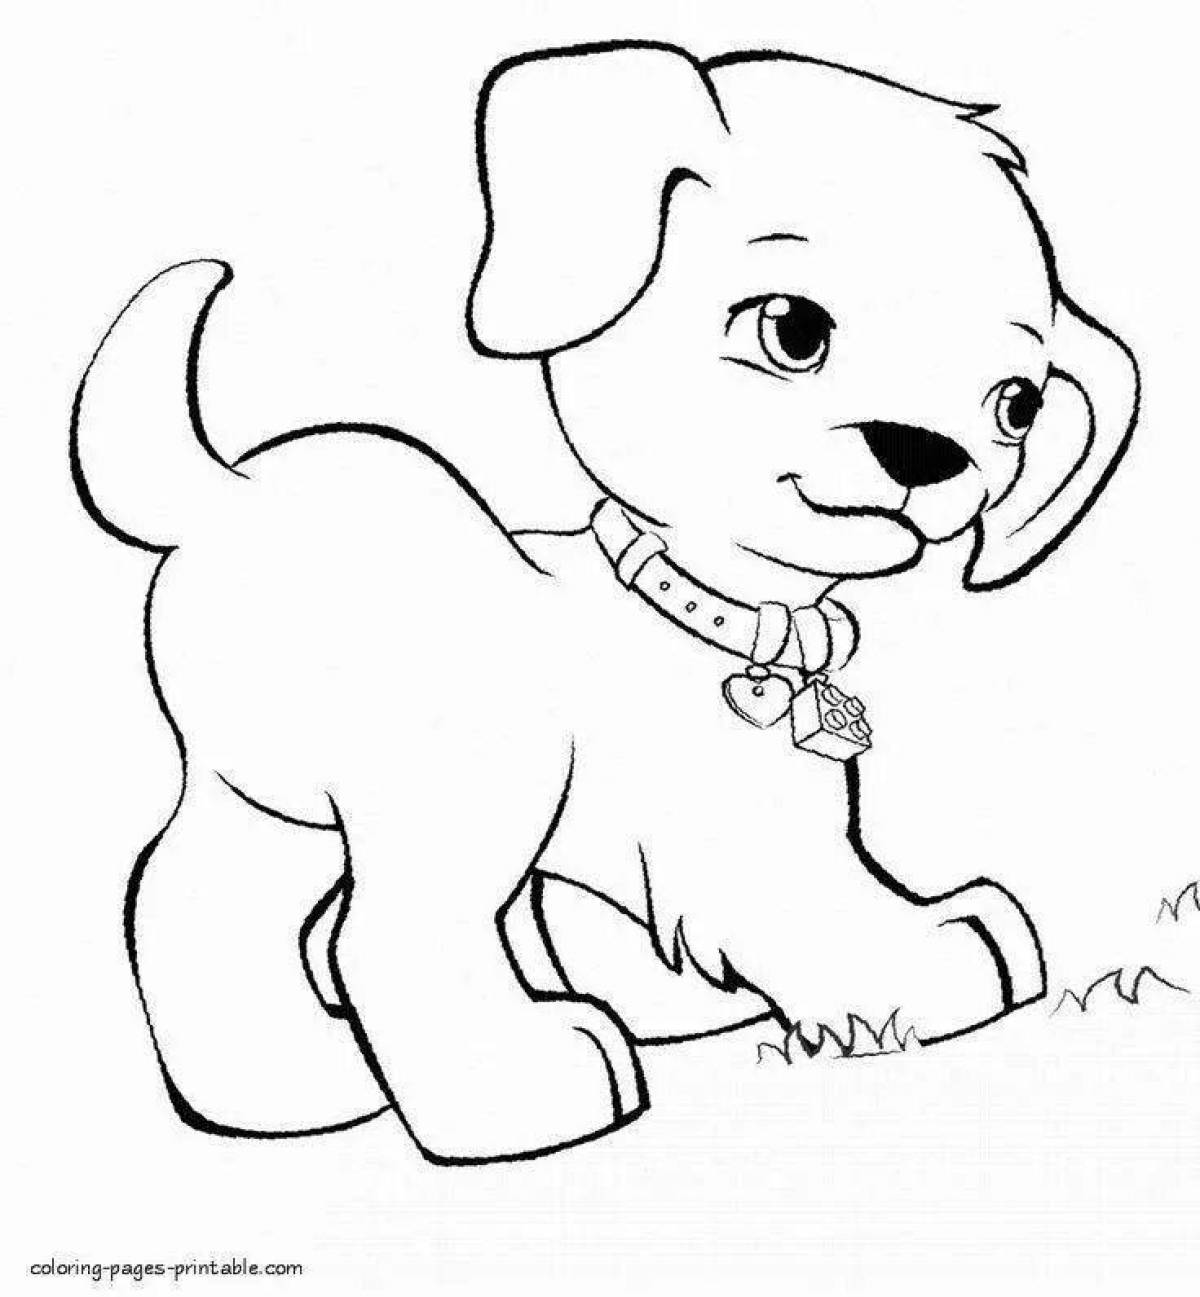 Snuggly coloring page pets cat dog